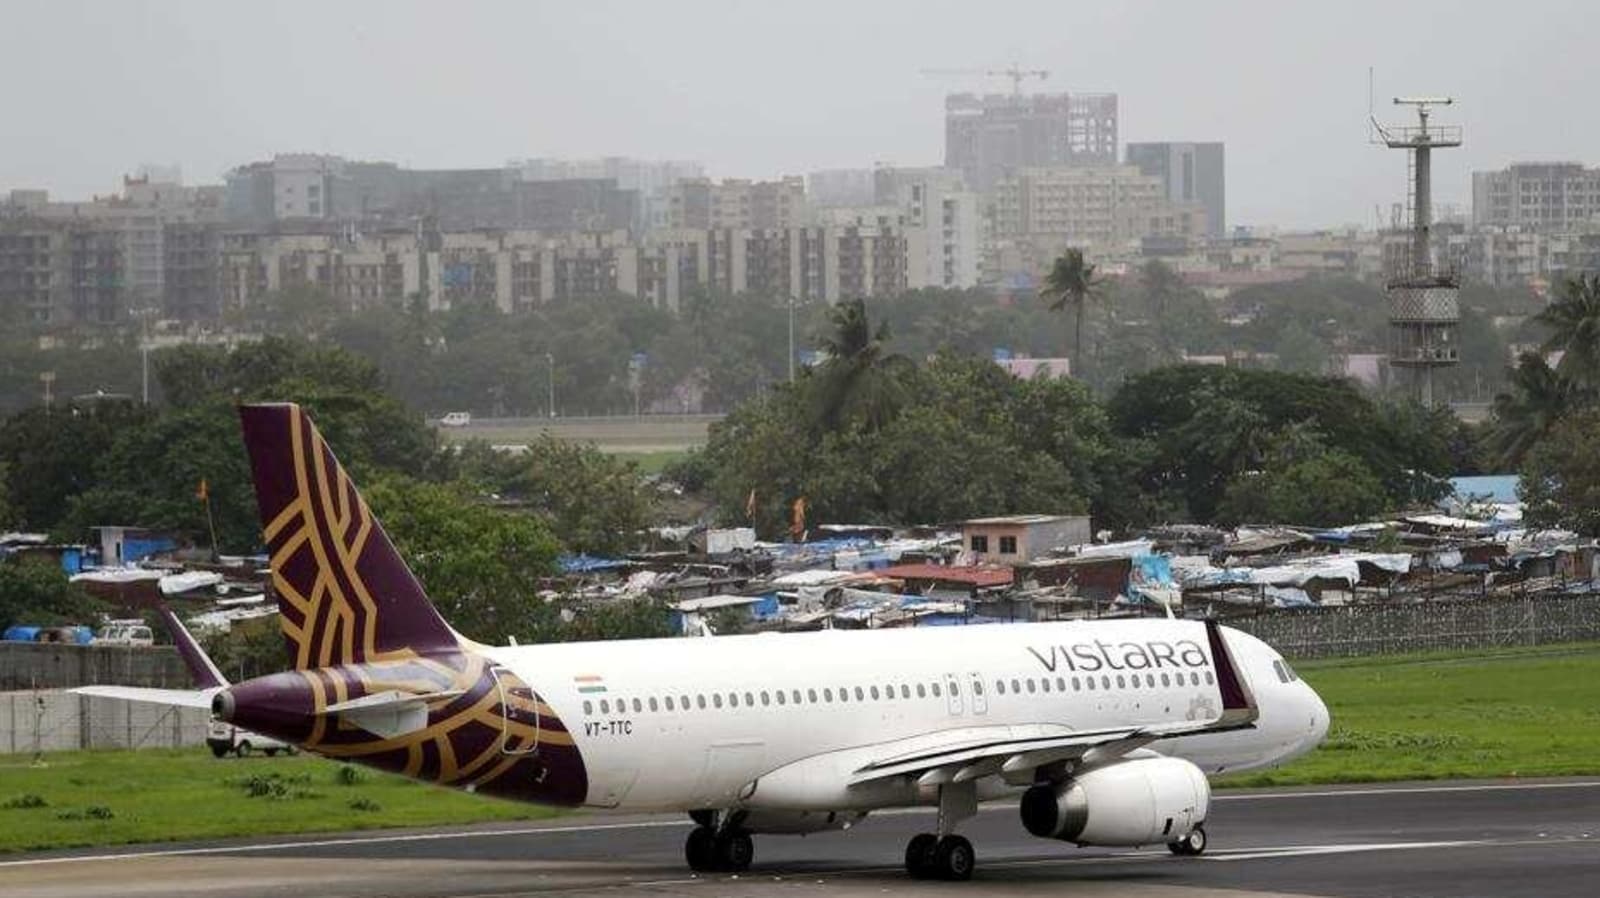 Covid-19: Hong Kong suspends flights to India from April 20 to May 3